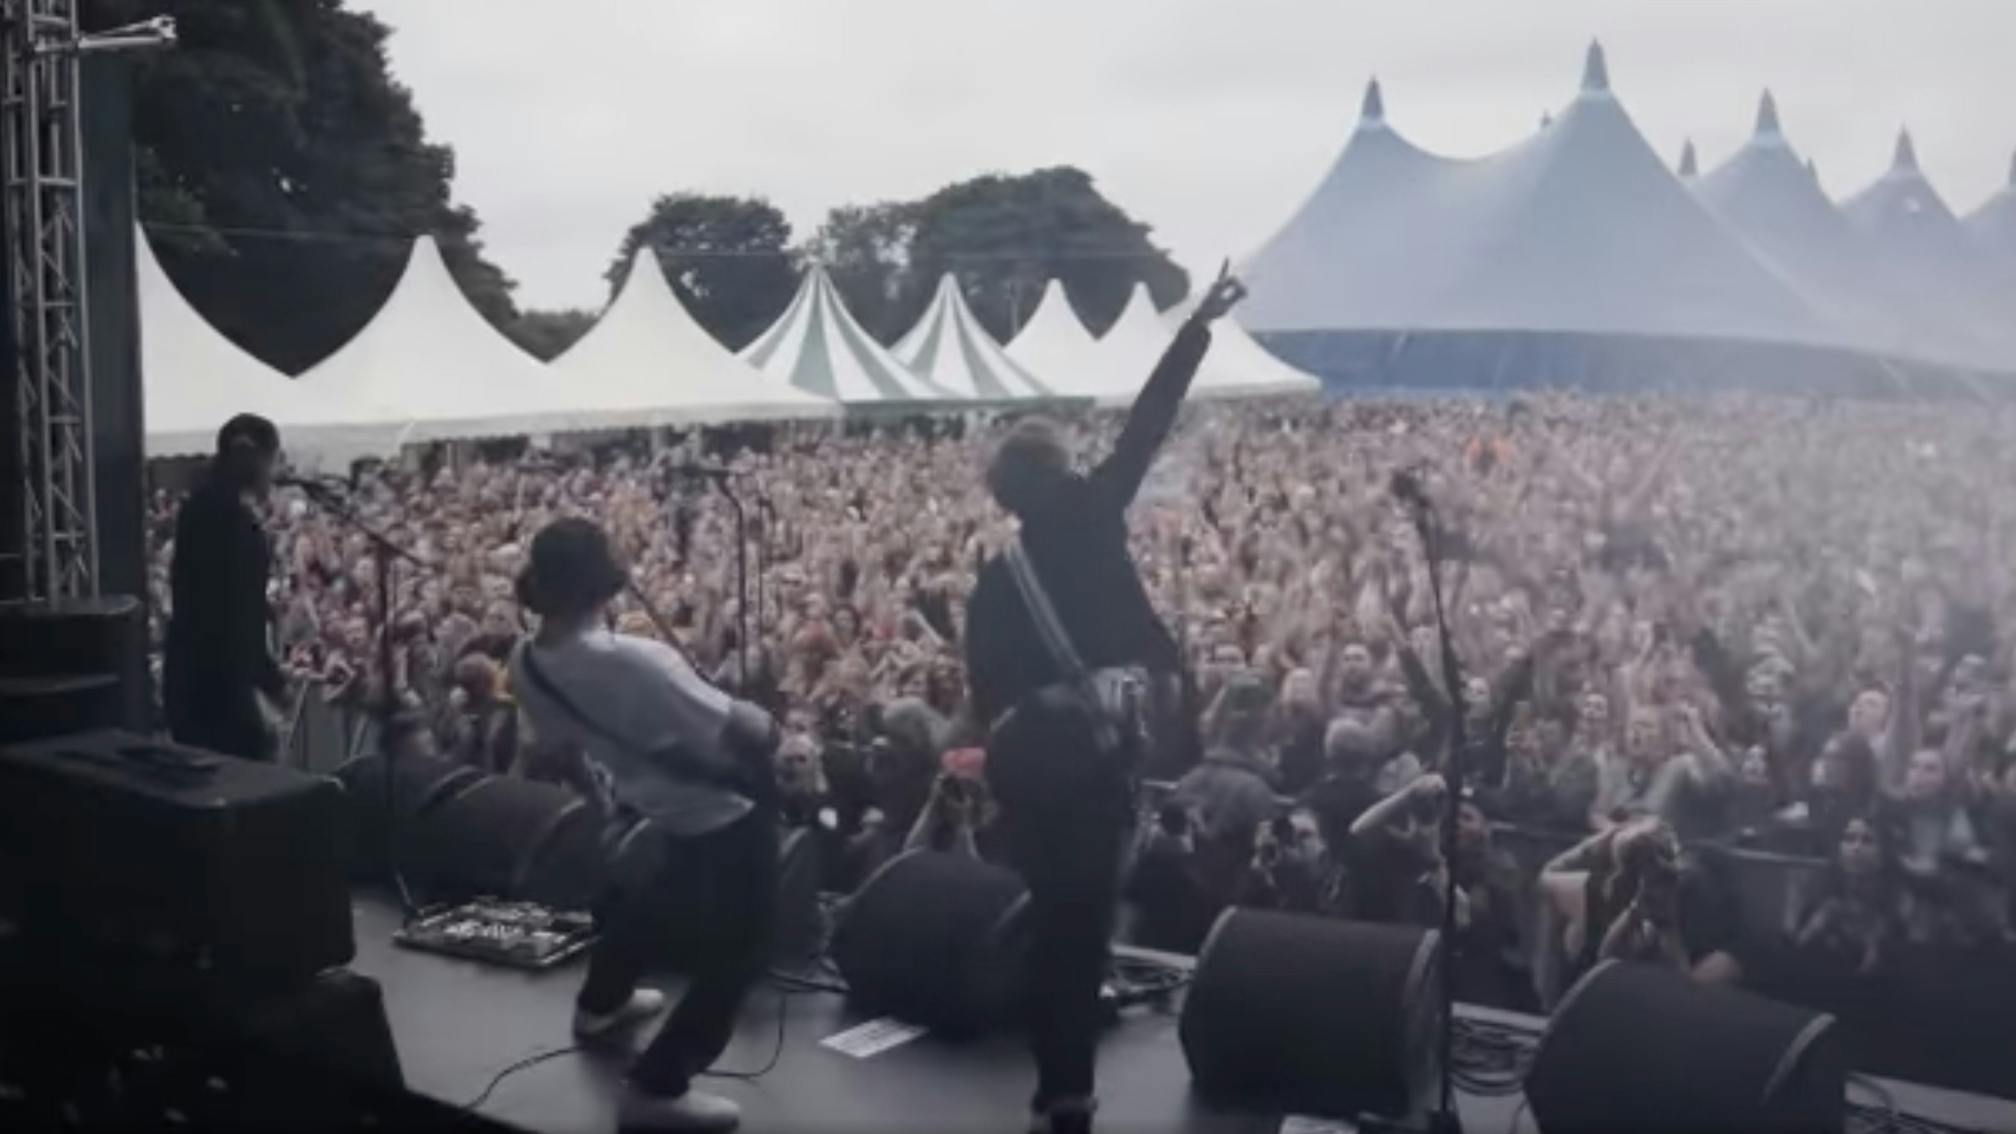 McFly were the secret special guests at Slam Dunk Festival this weekend